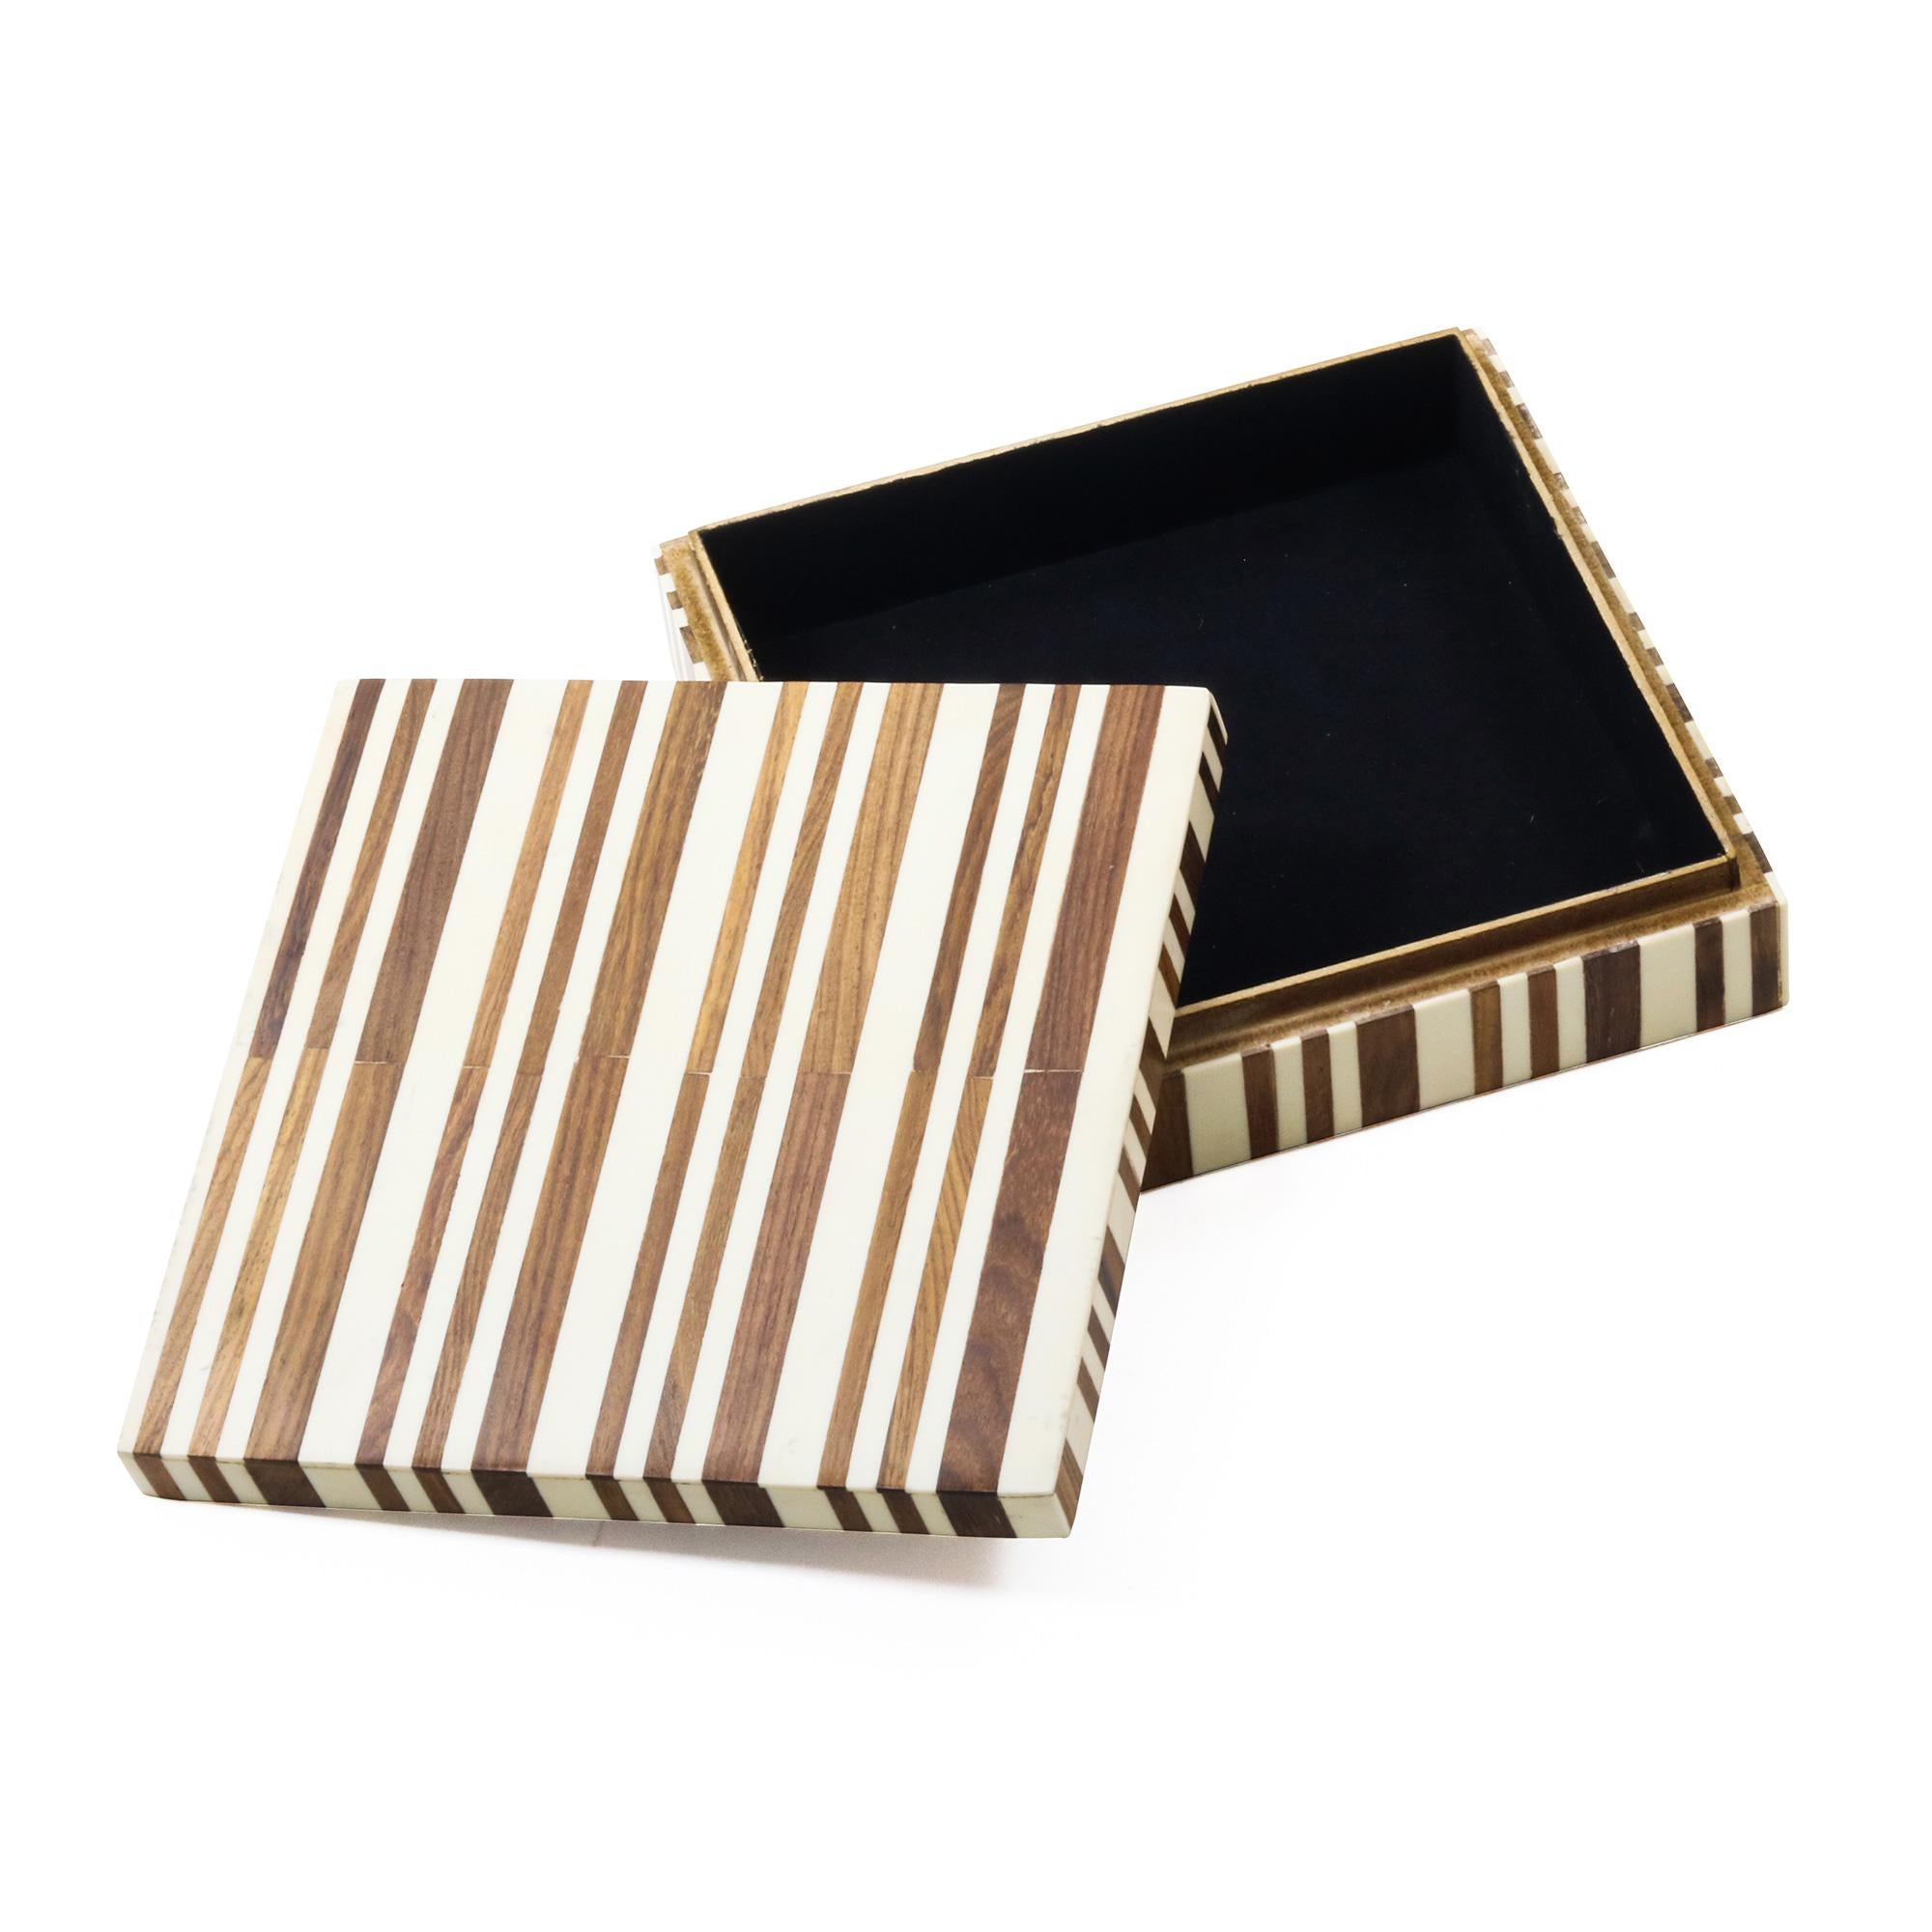 A square brown and cream decorative resin box featuring a striped pattern of varying thicknesses.
      